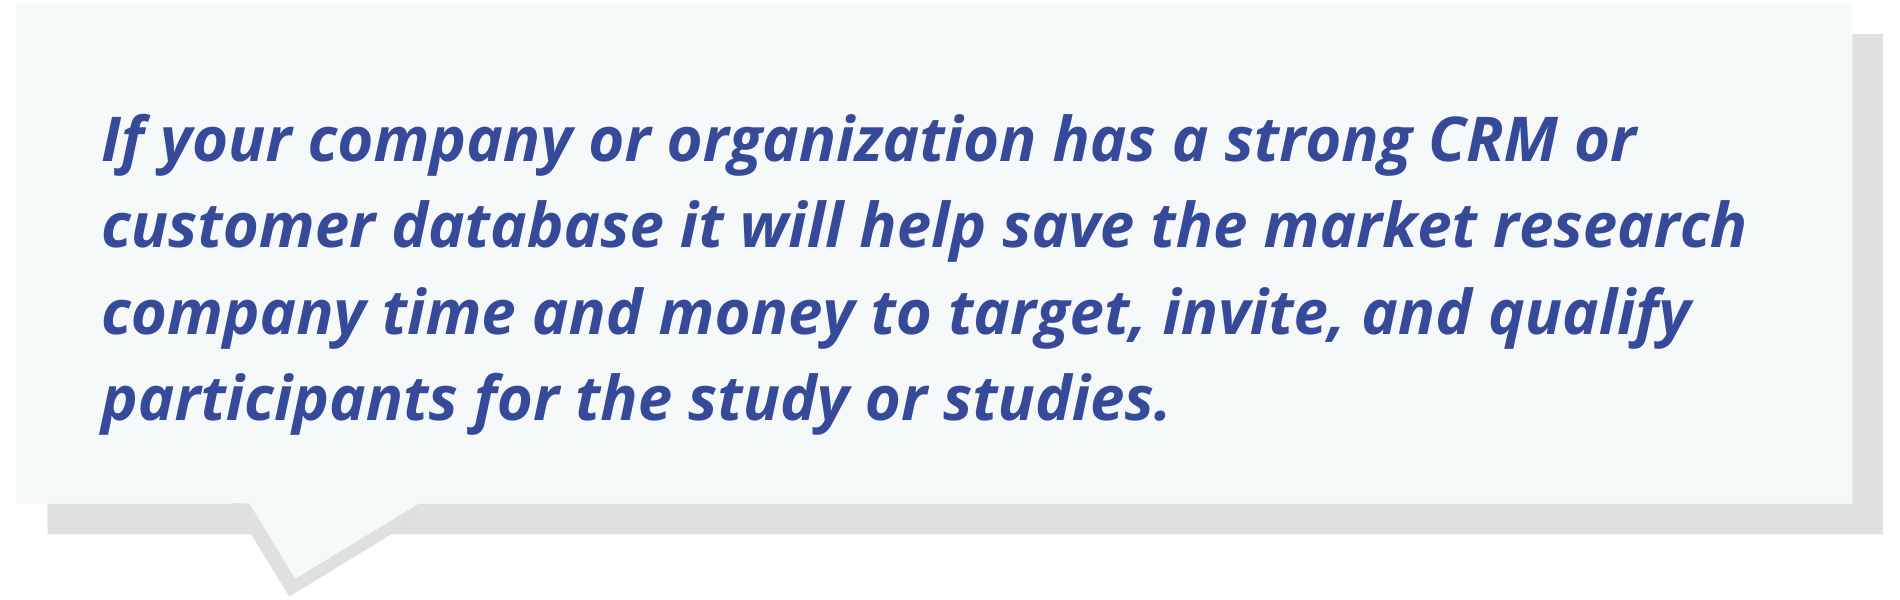 If your company or organization has a strong CRM or customer database it will help save the market research company time and money to target, invite, and qualify participants for the study or studies.